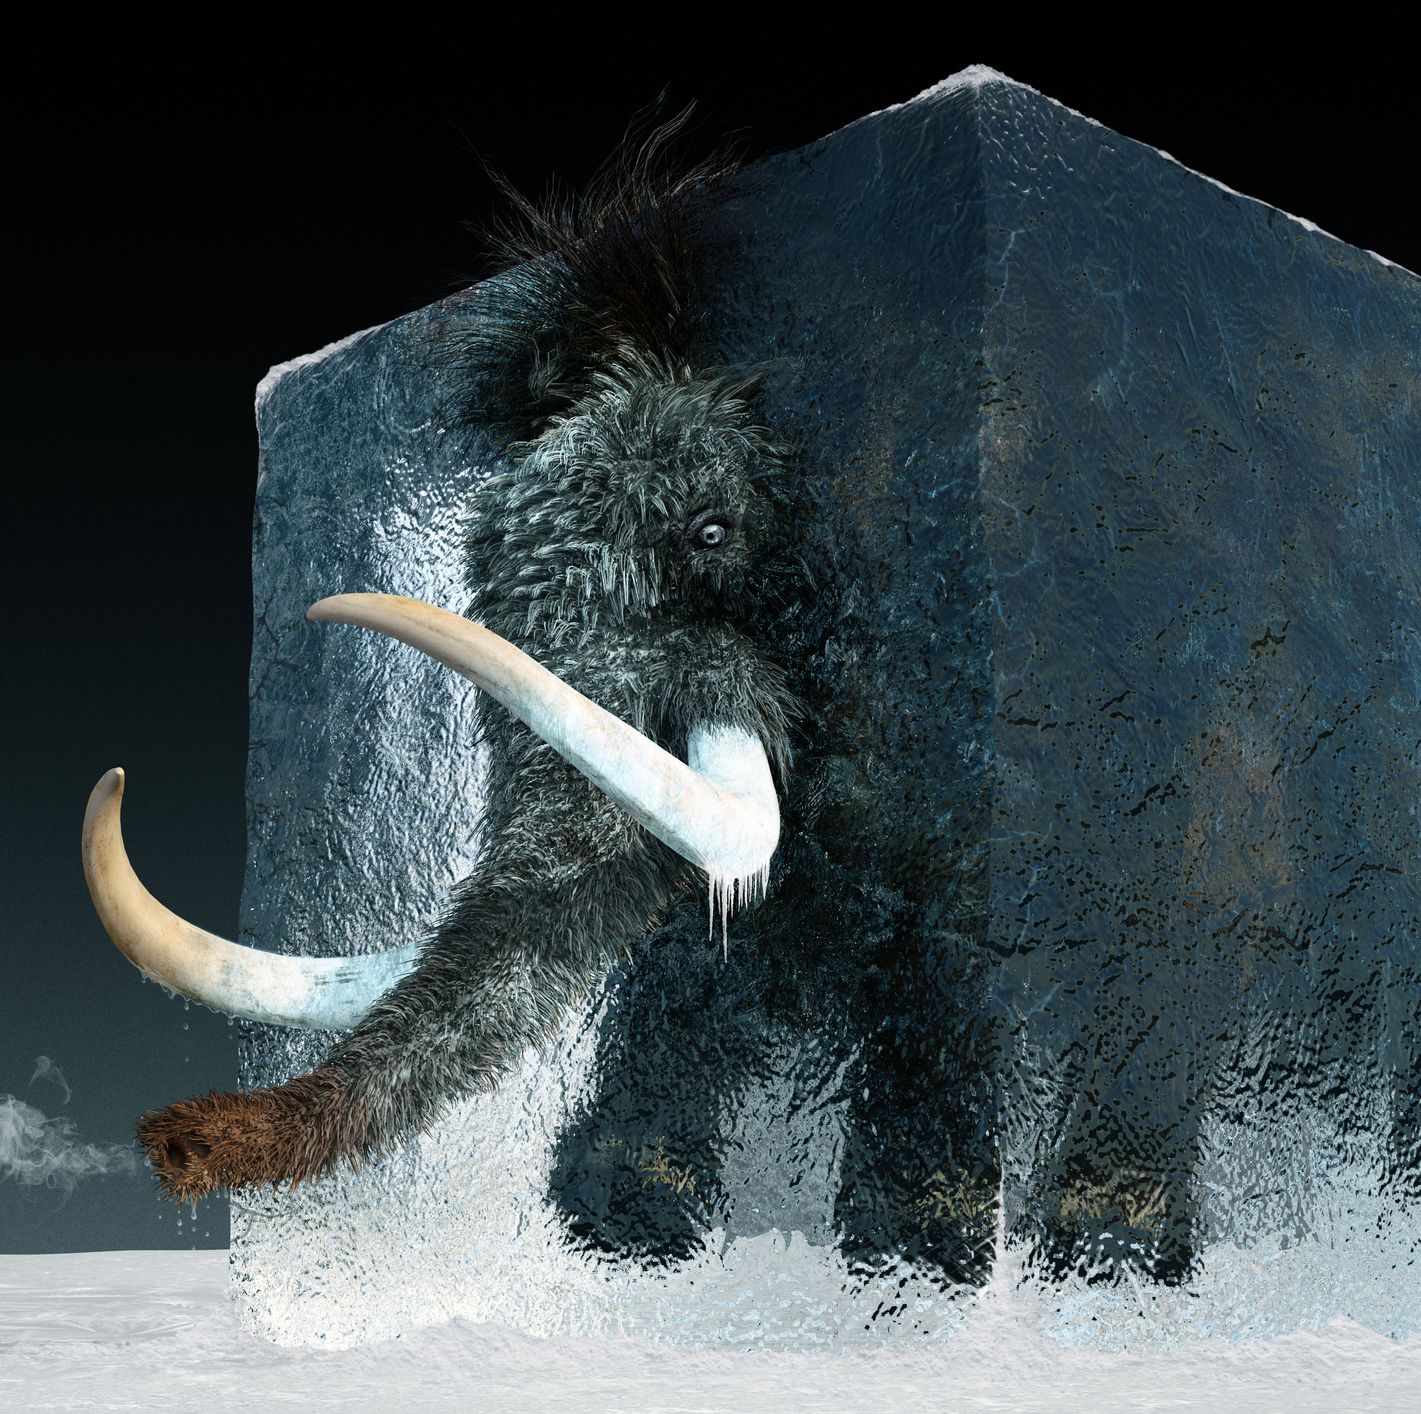 Scientists Are Reincarnating the Woolly Mammoth to Return in 4 Years